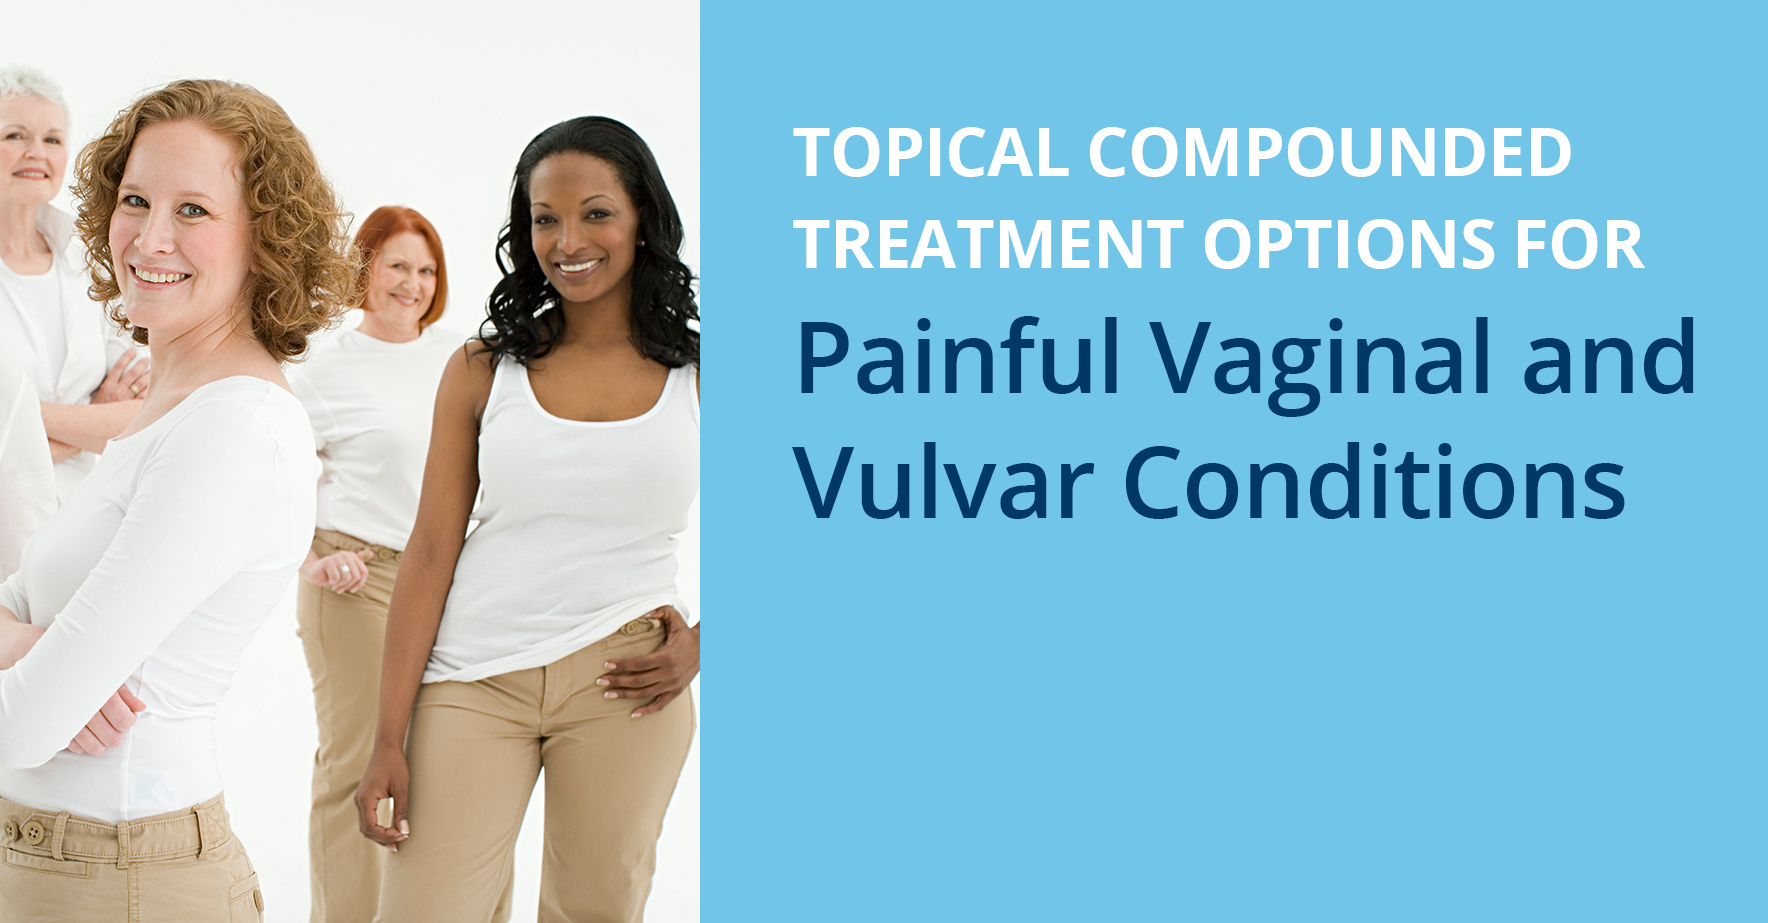 Topical_Compounded_Treatment_Options_for_Painful_Vaginal_and_Vulvar_Conditions.jpg